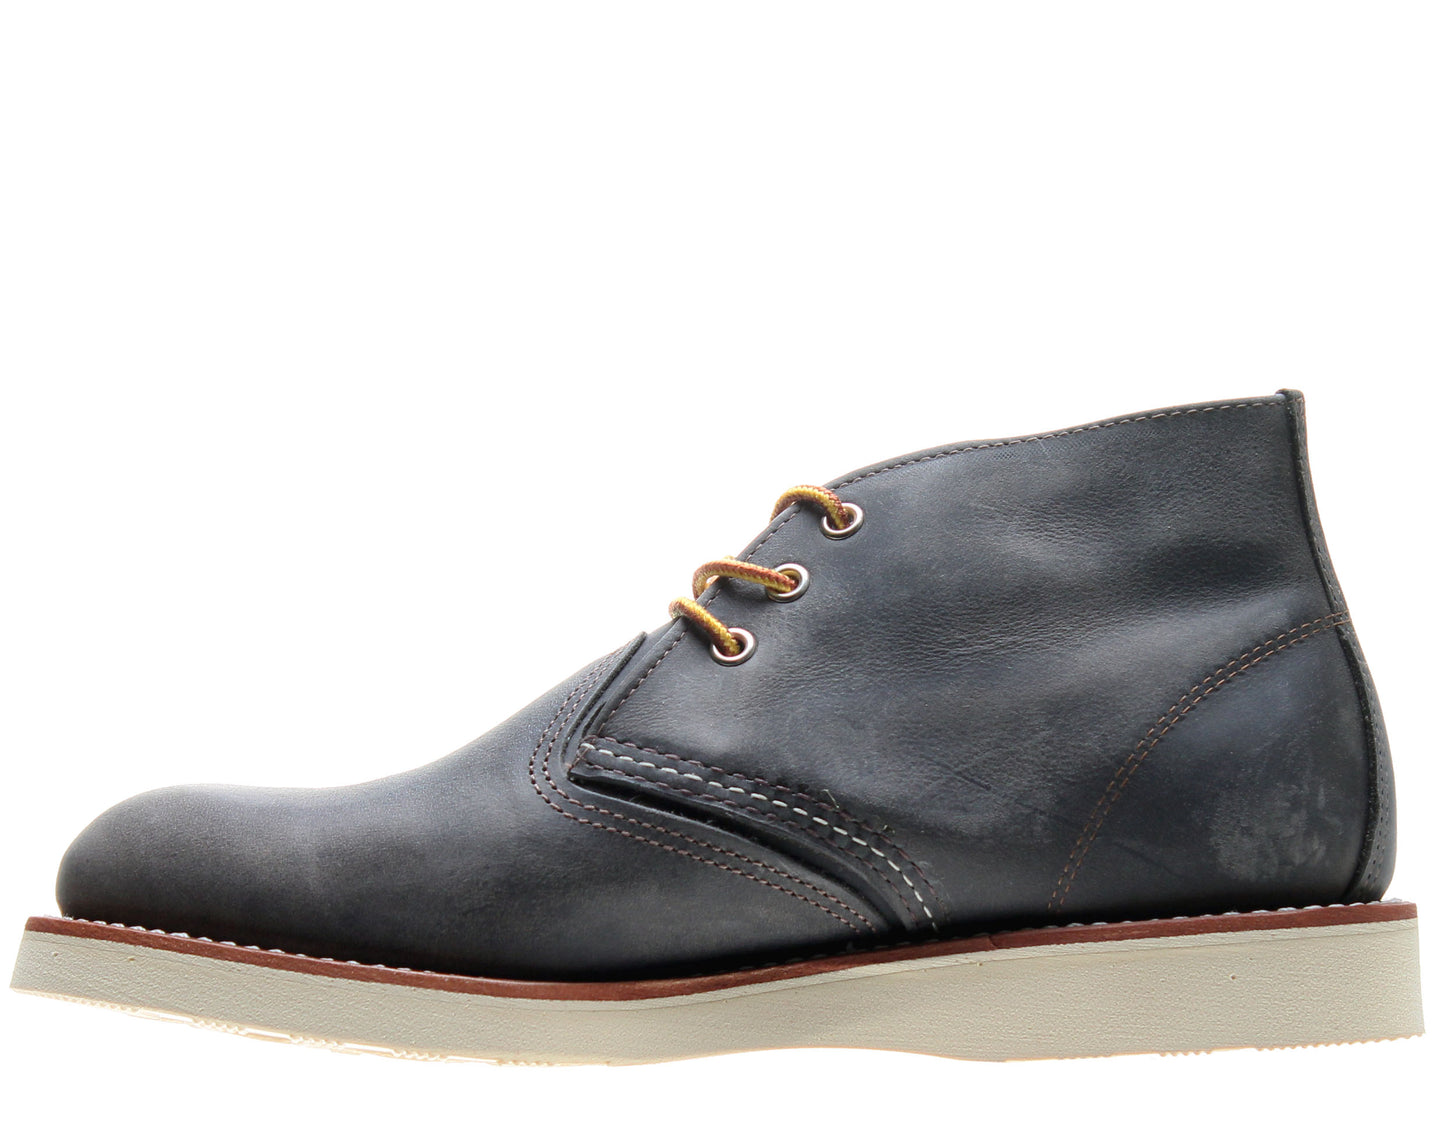 Red Wing Heritage 3138 Classic Chukka Men's Boots